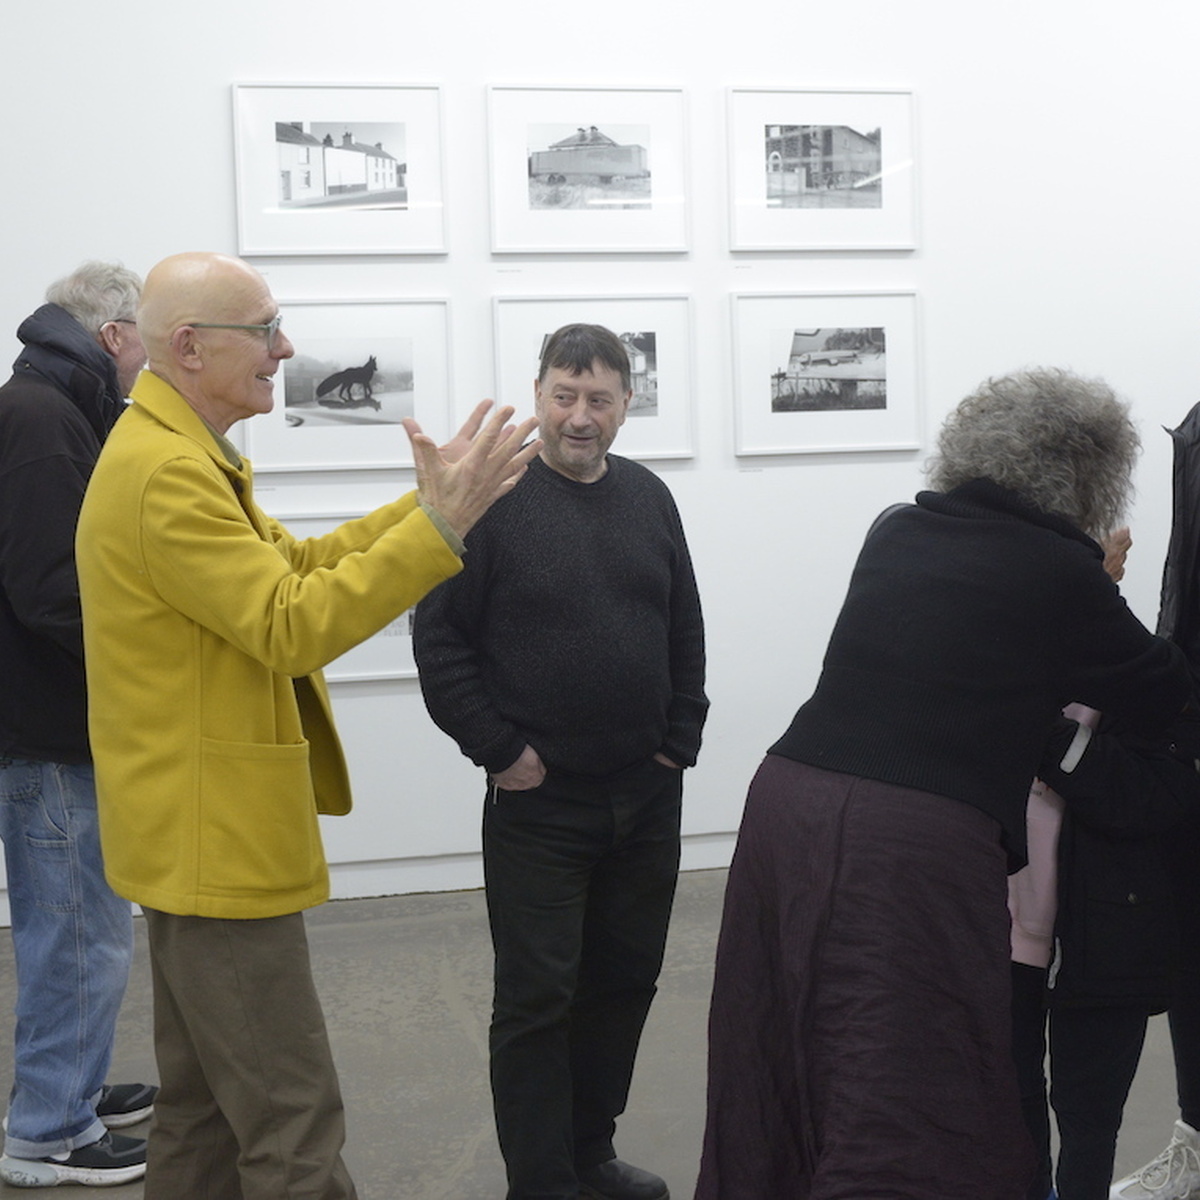 Francis McKee stands in the middle of a gallery, with many people around him.